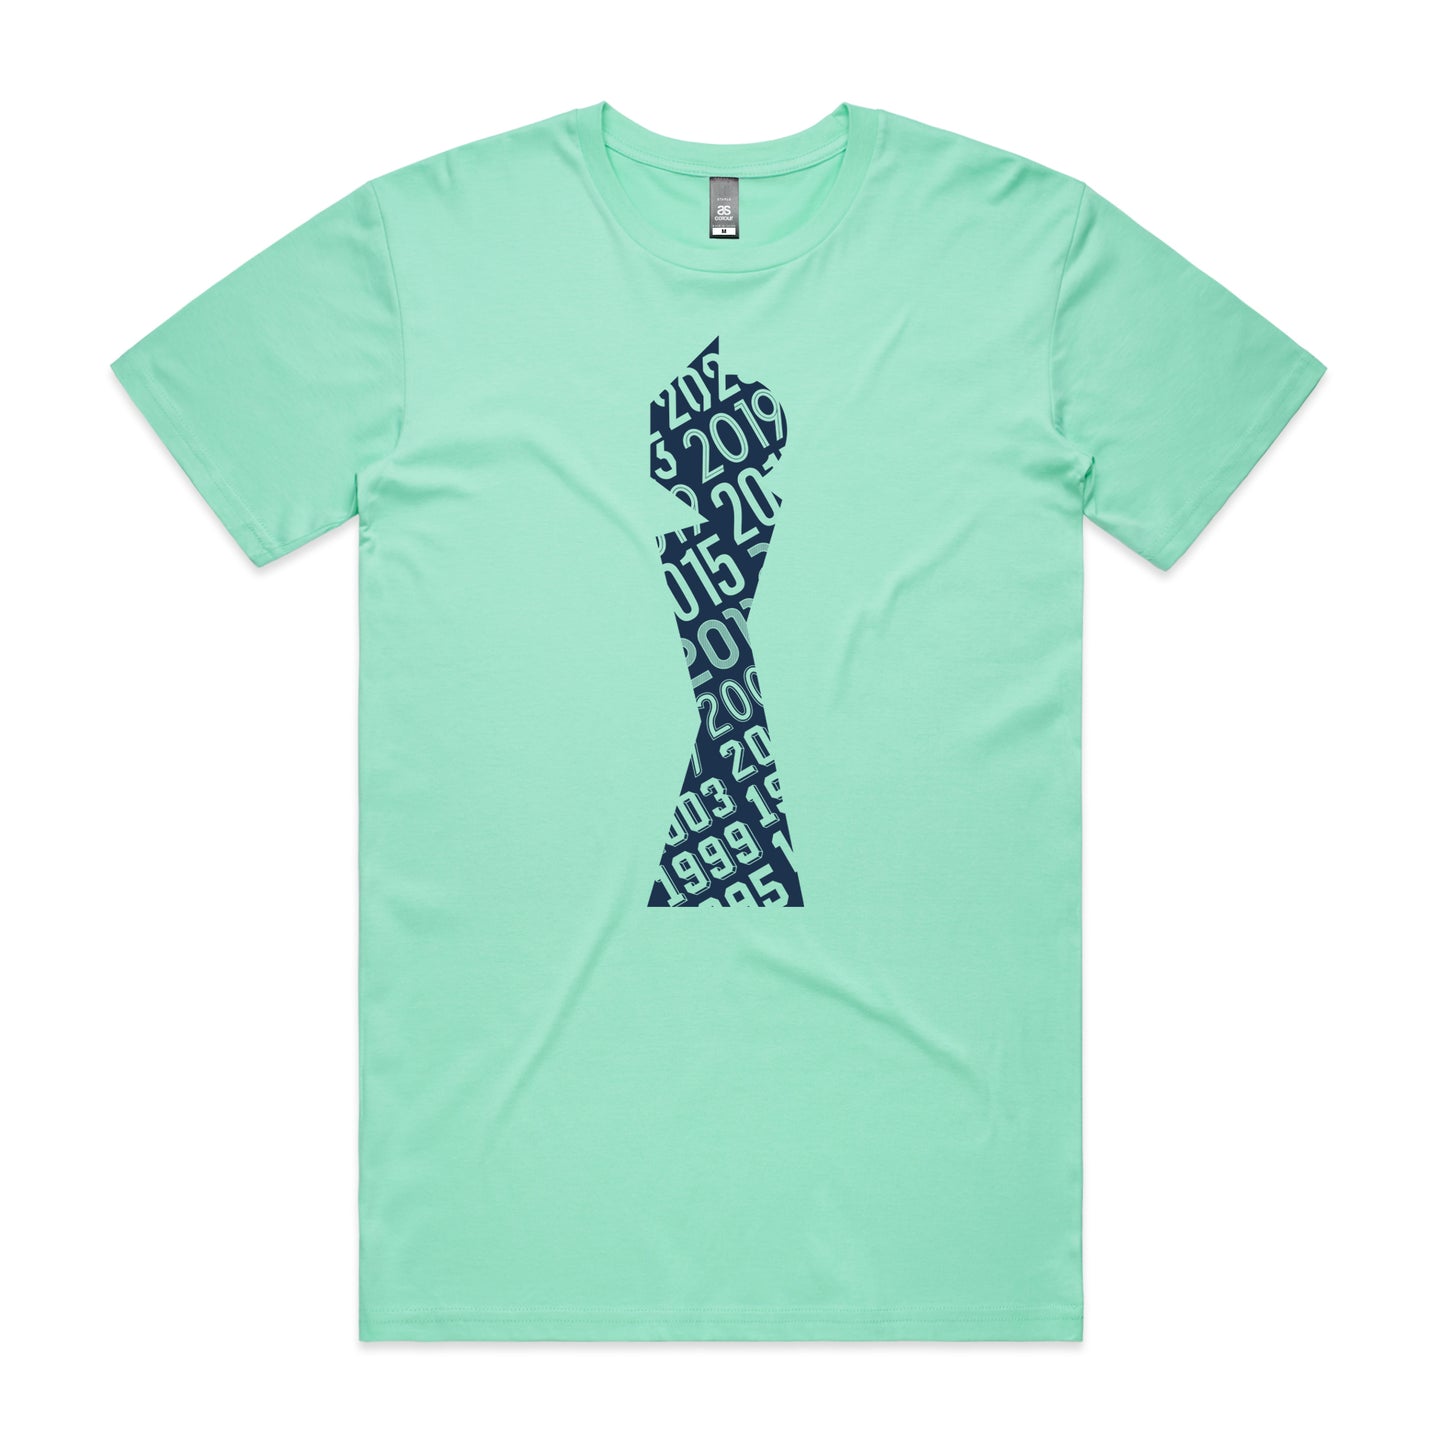 Eight World Cups and Counting T-shirt